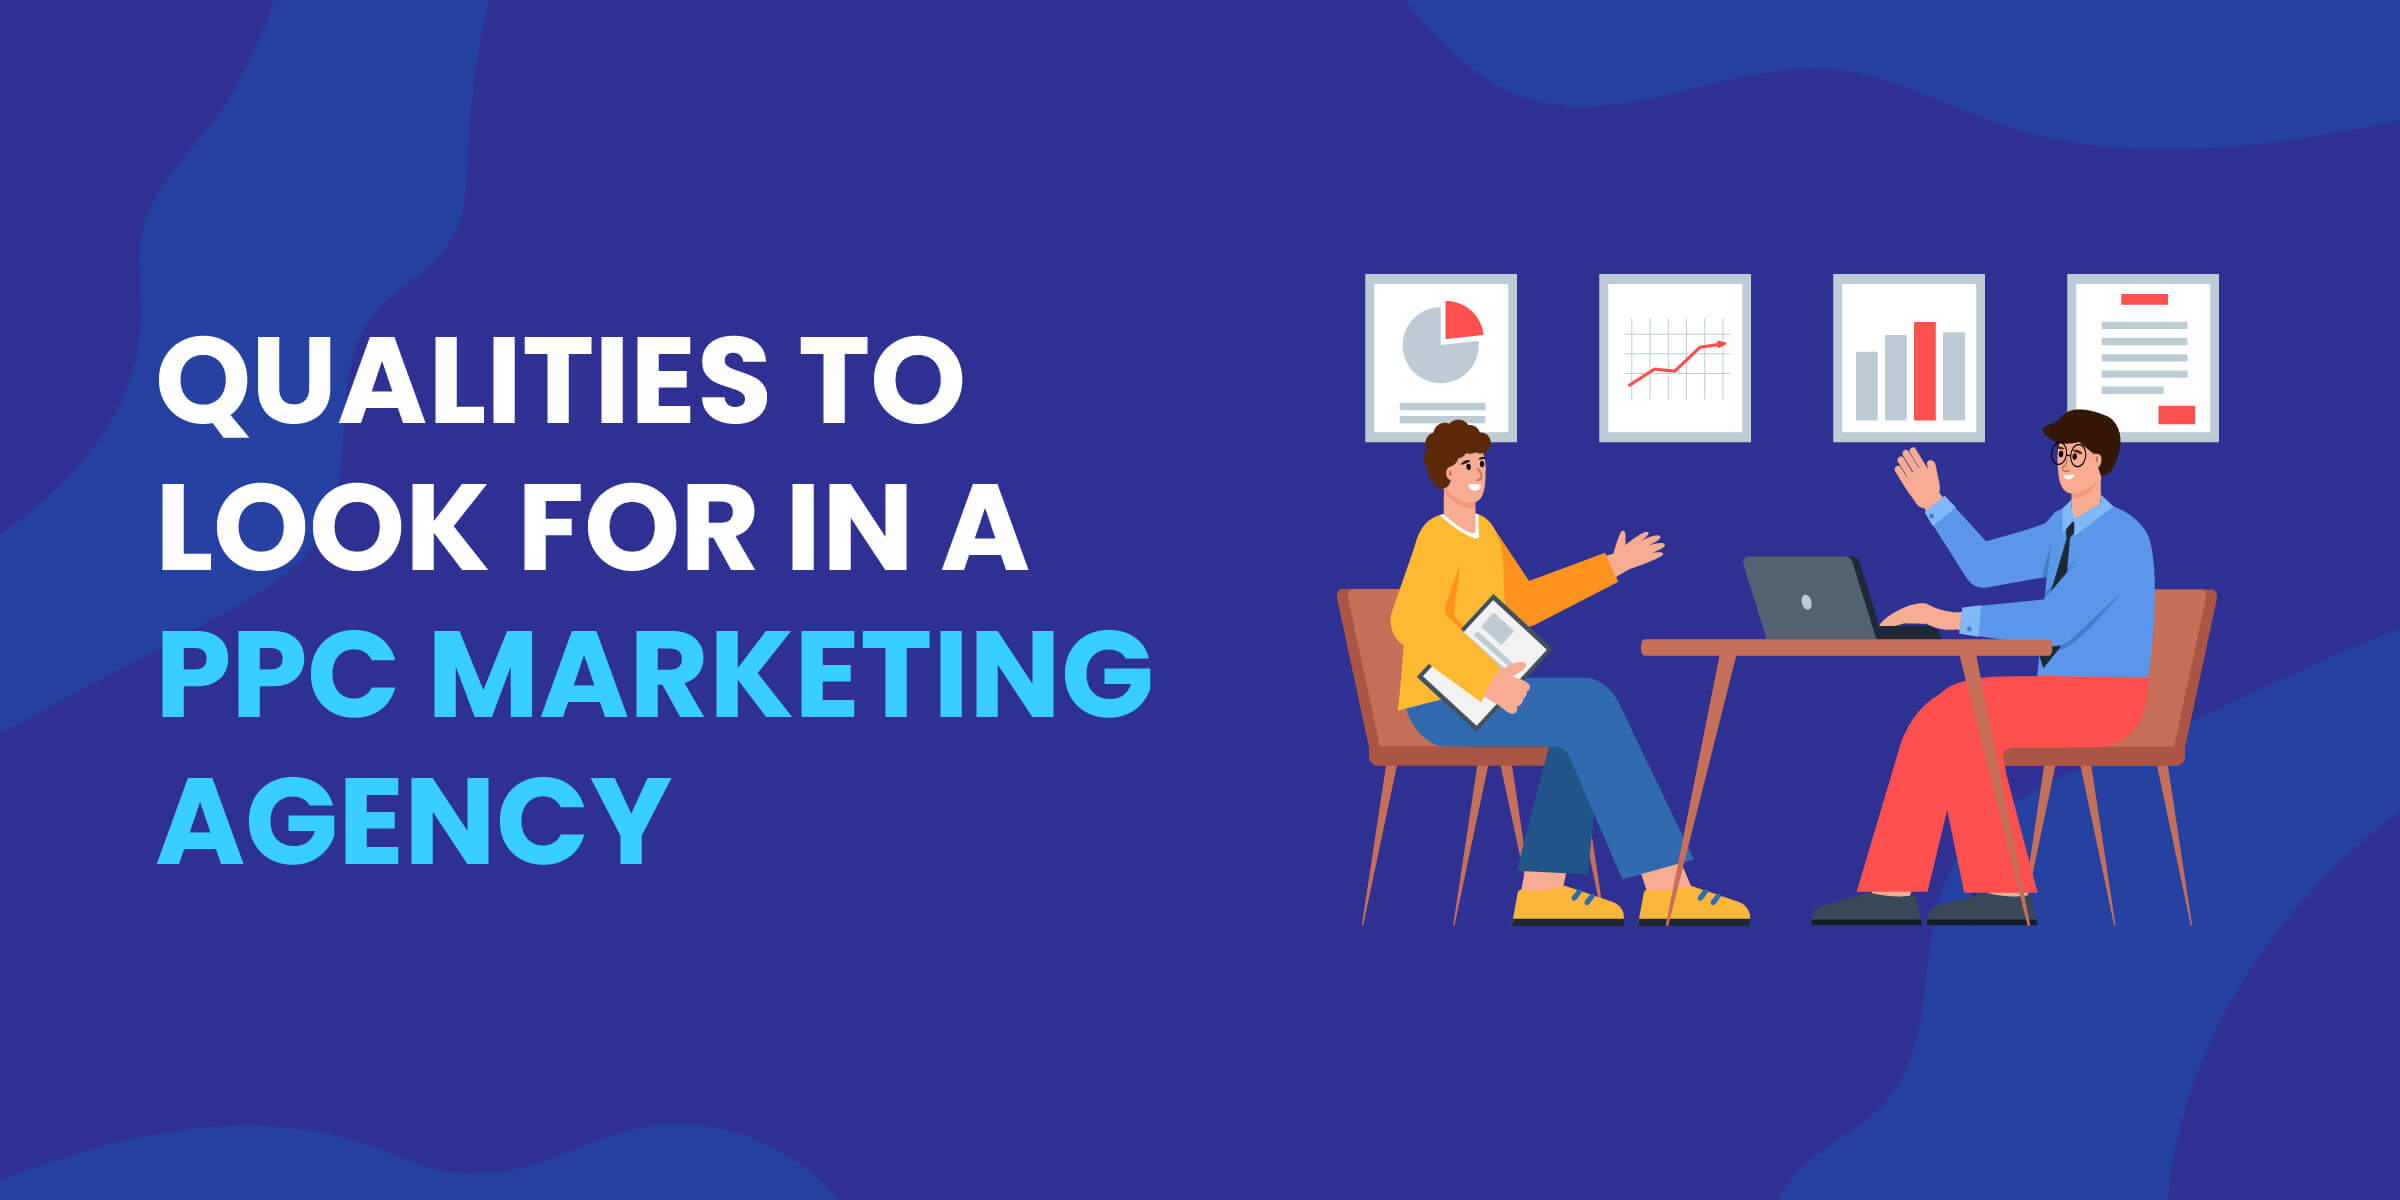 Qualities to Look for in PPC Marketing Agency